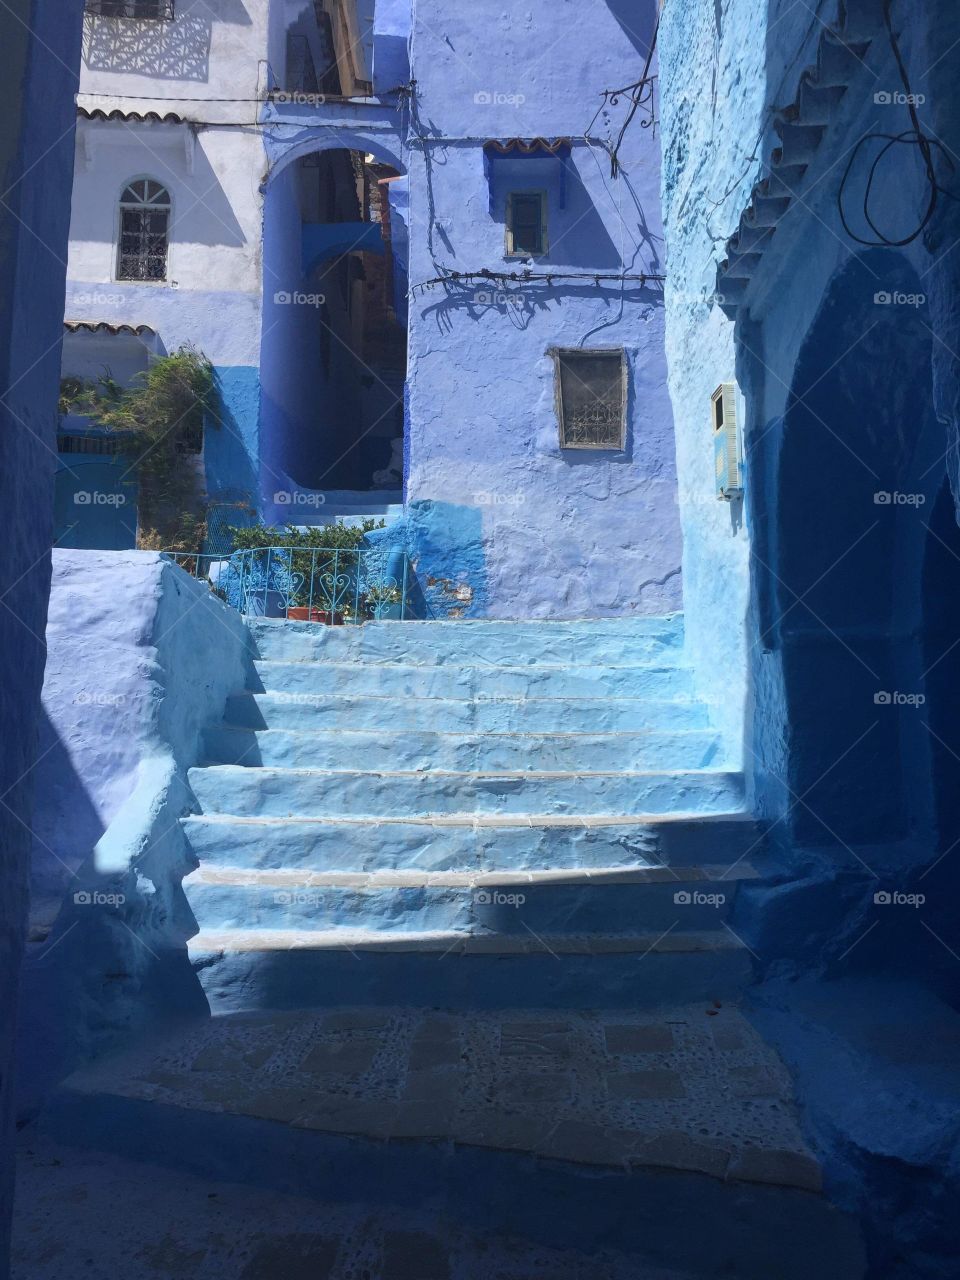 Chefchaouen . City in morocco 🇲🇦